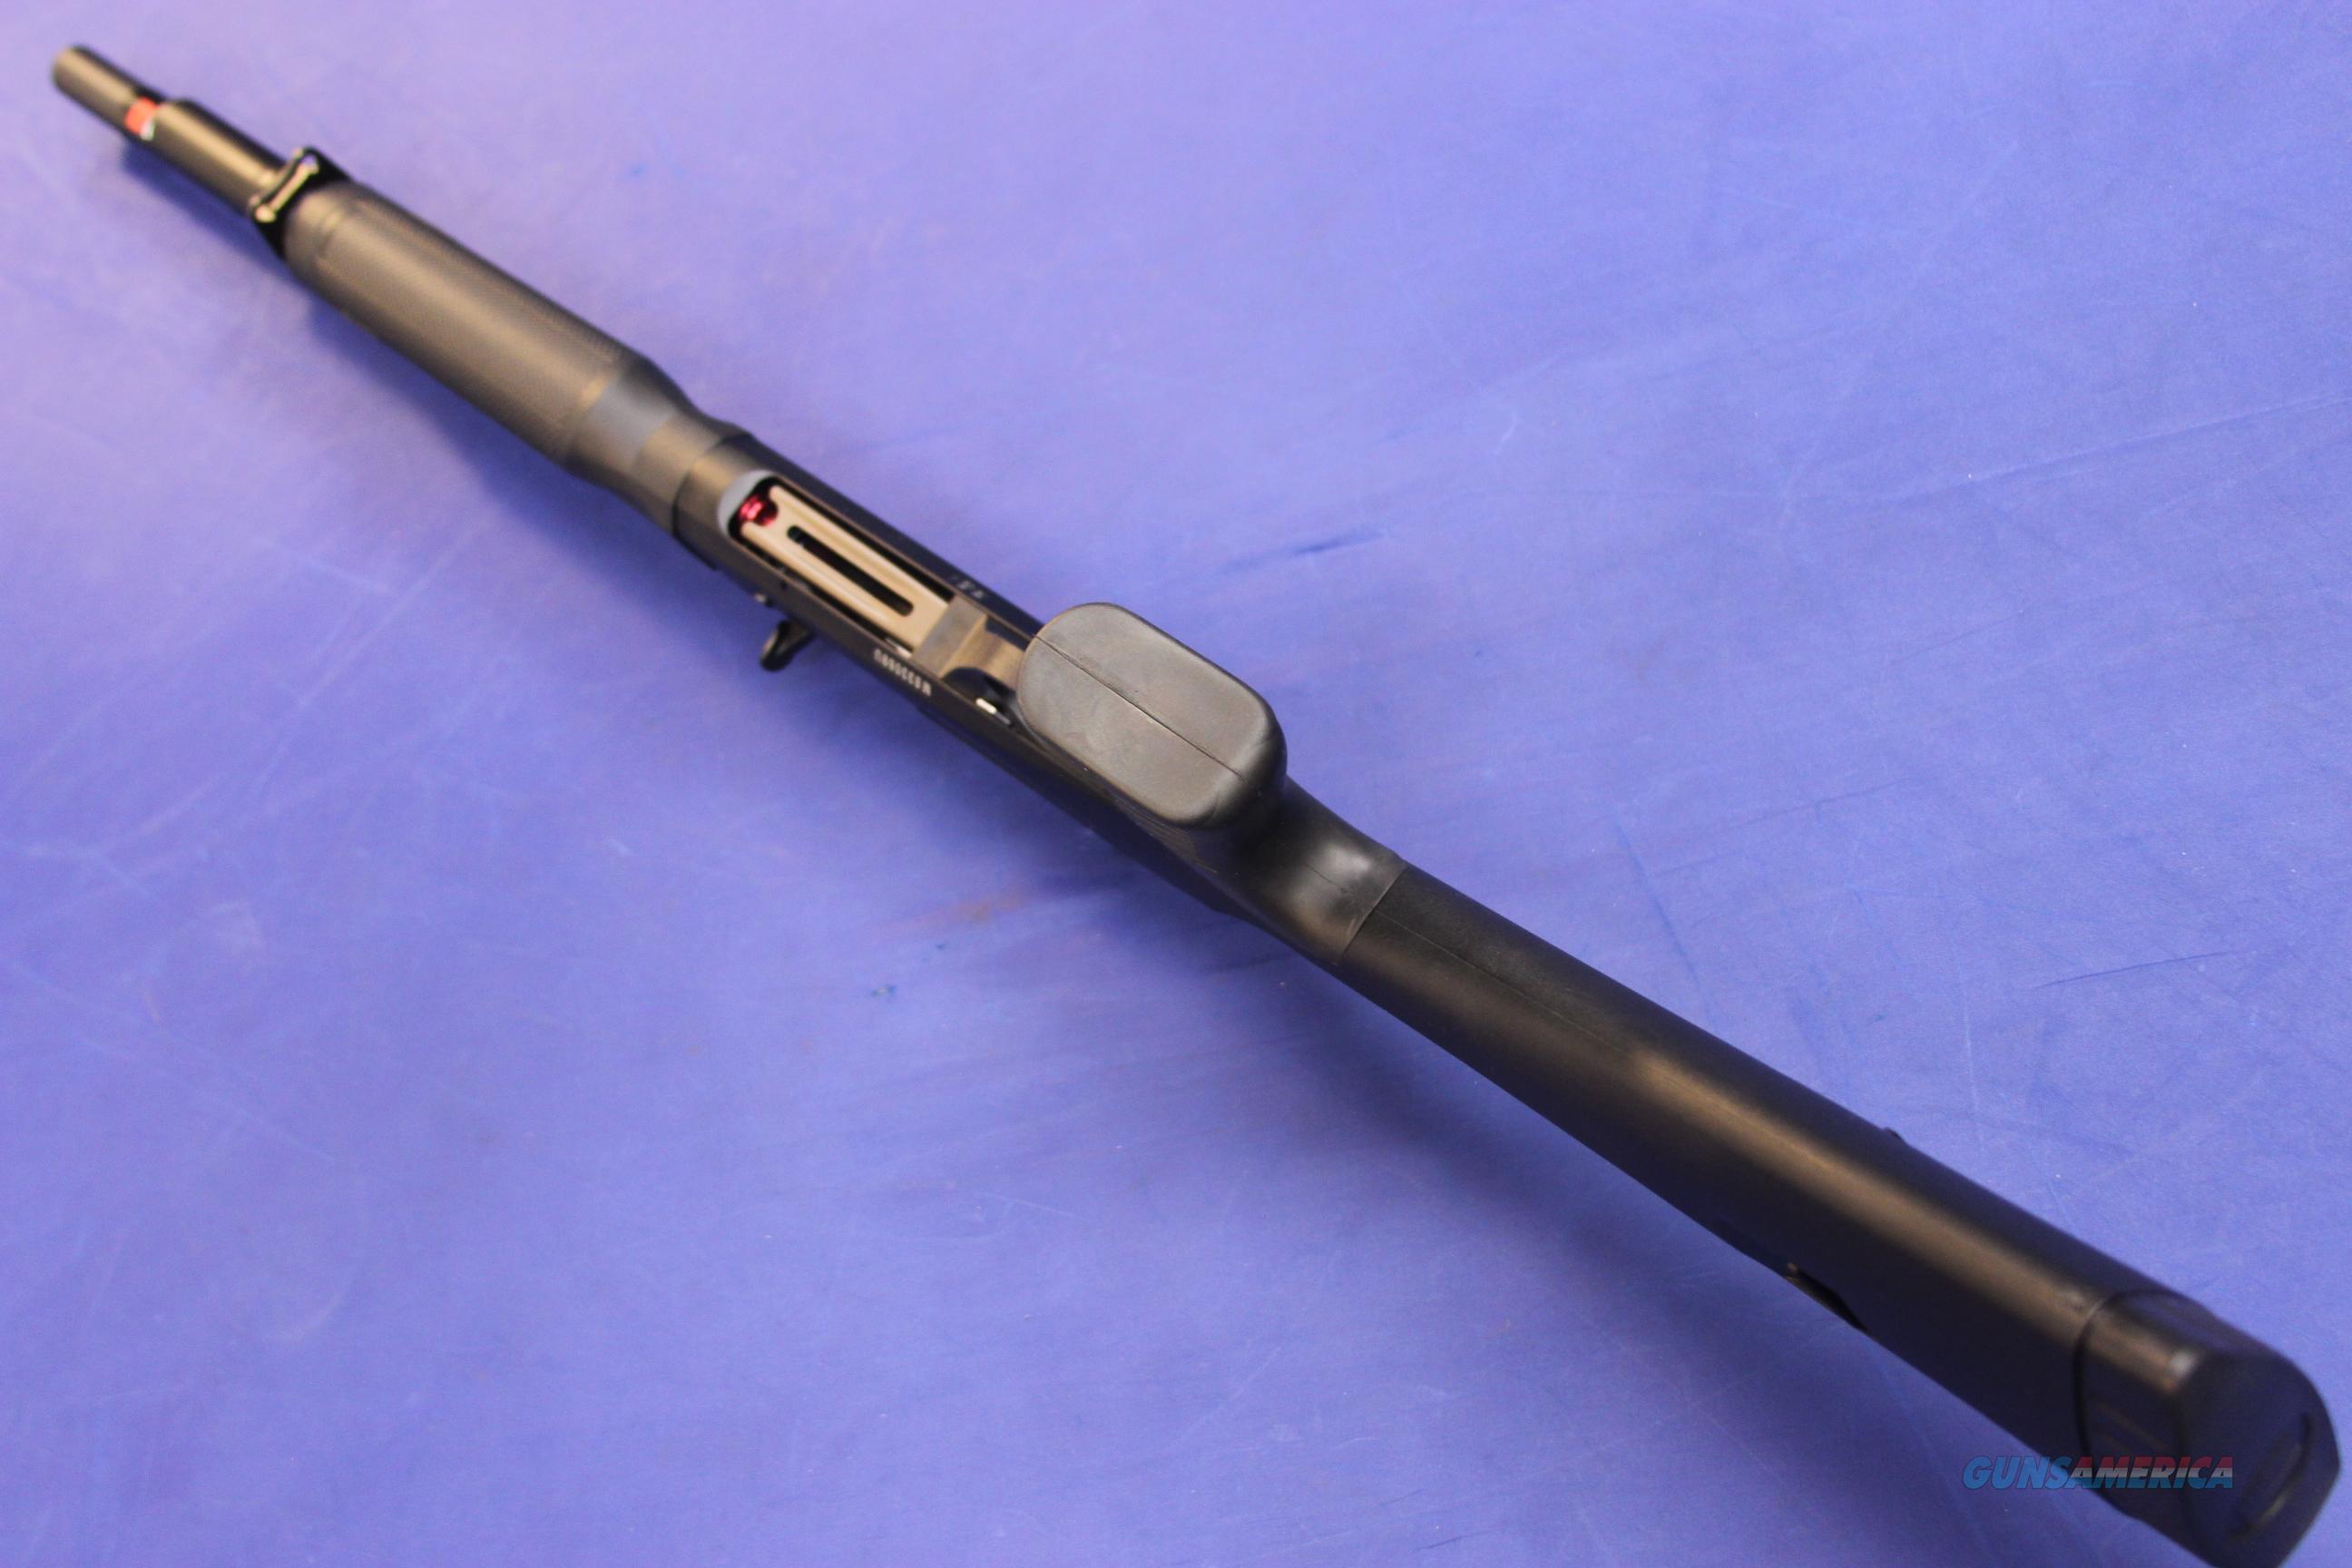 12 ga benelli m2 with comfortech stock